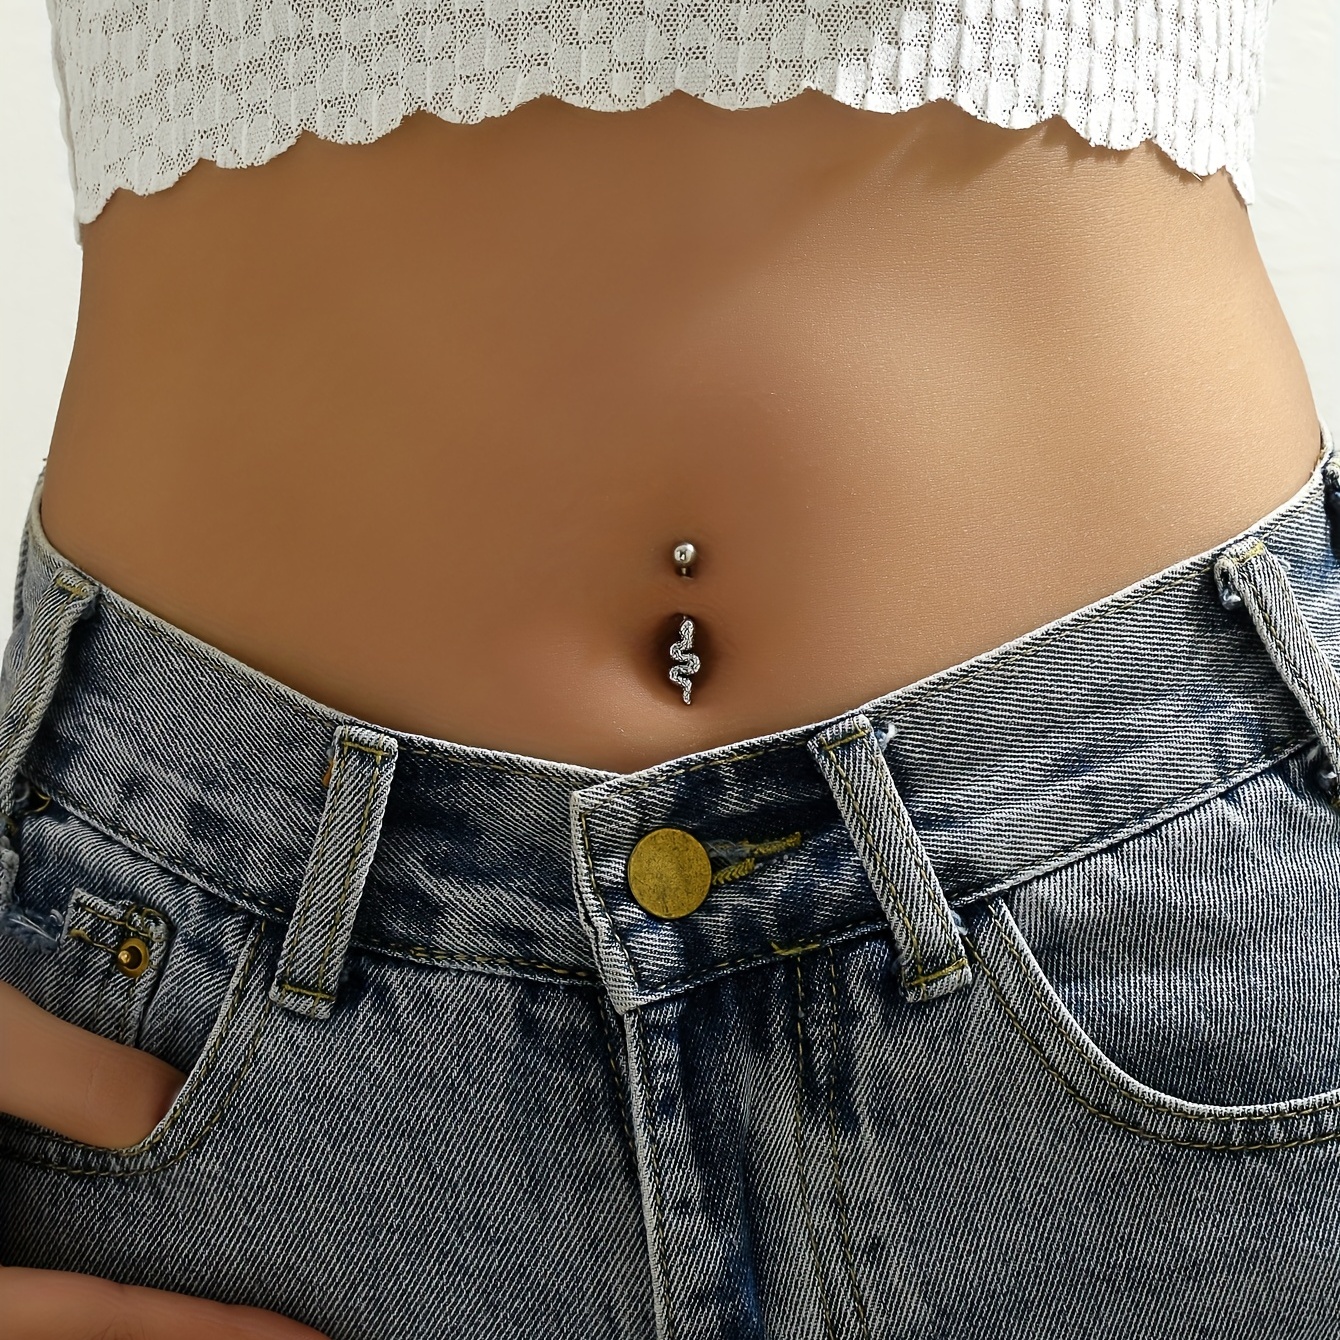 Red Cherry Belly Button Ring Ladies Navel Nail Piercing Jewelry - Temu